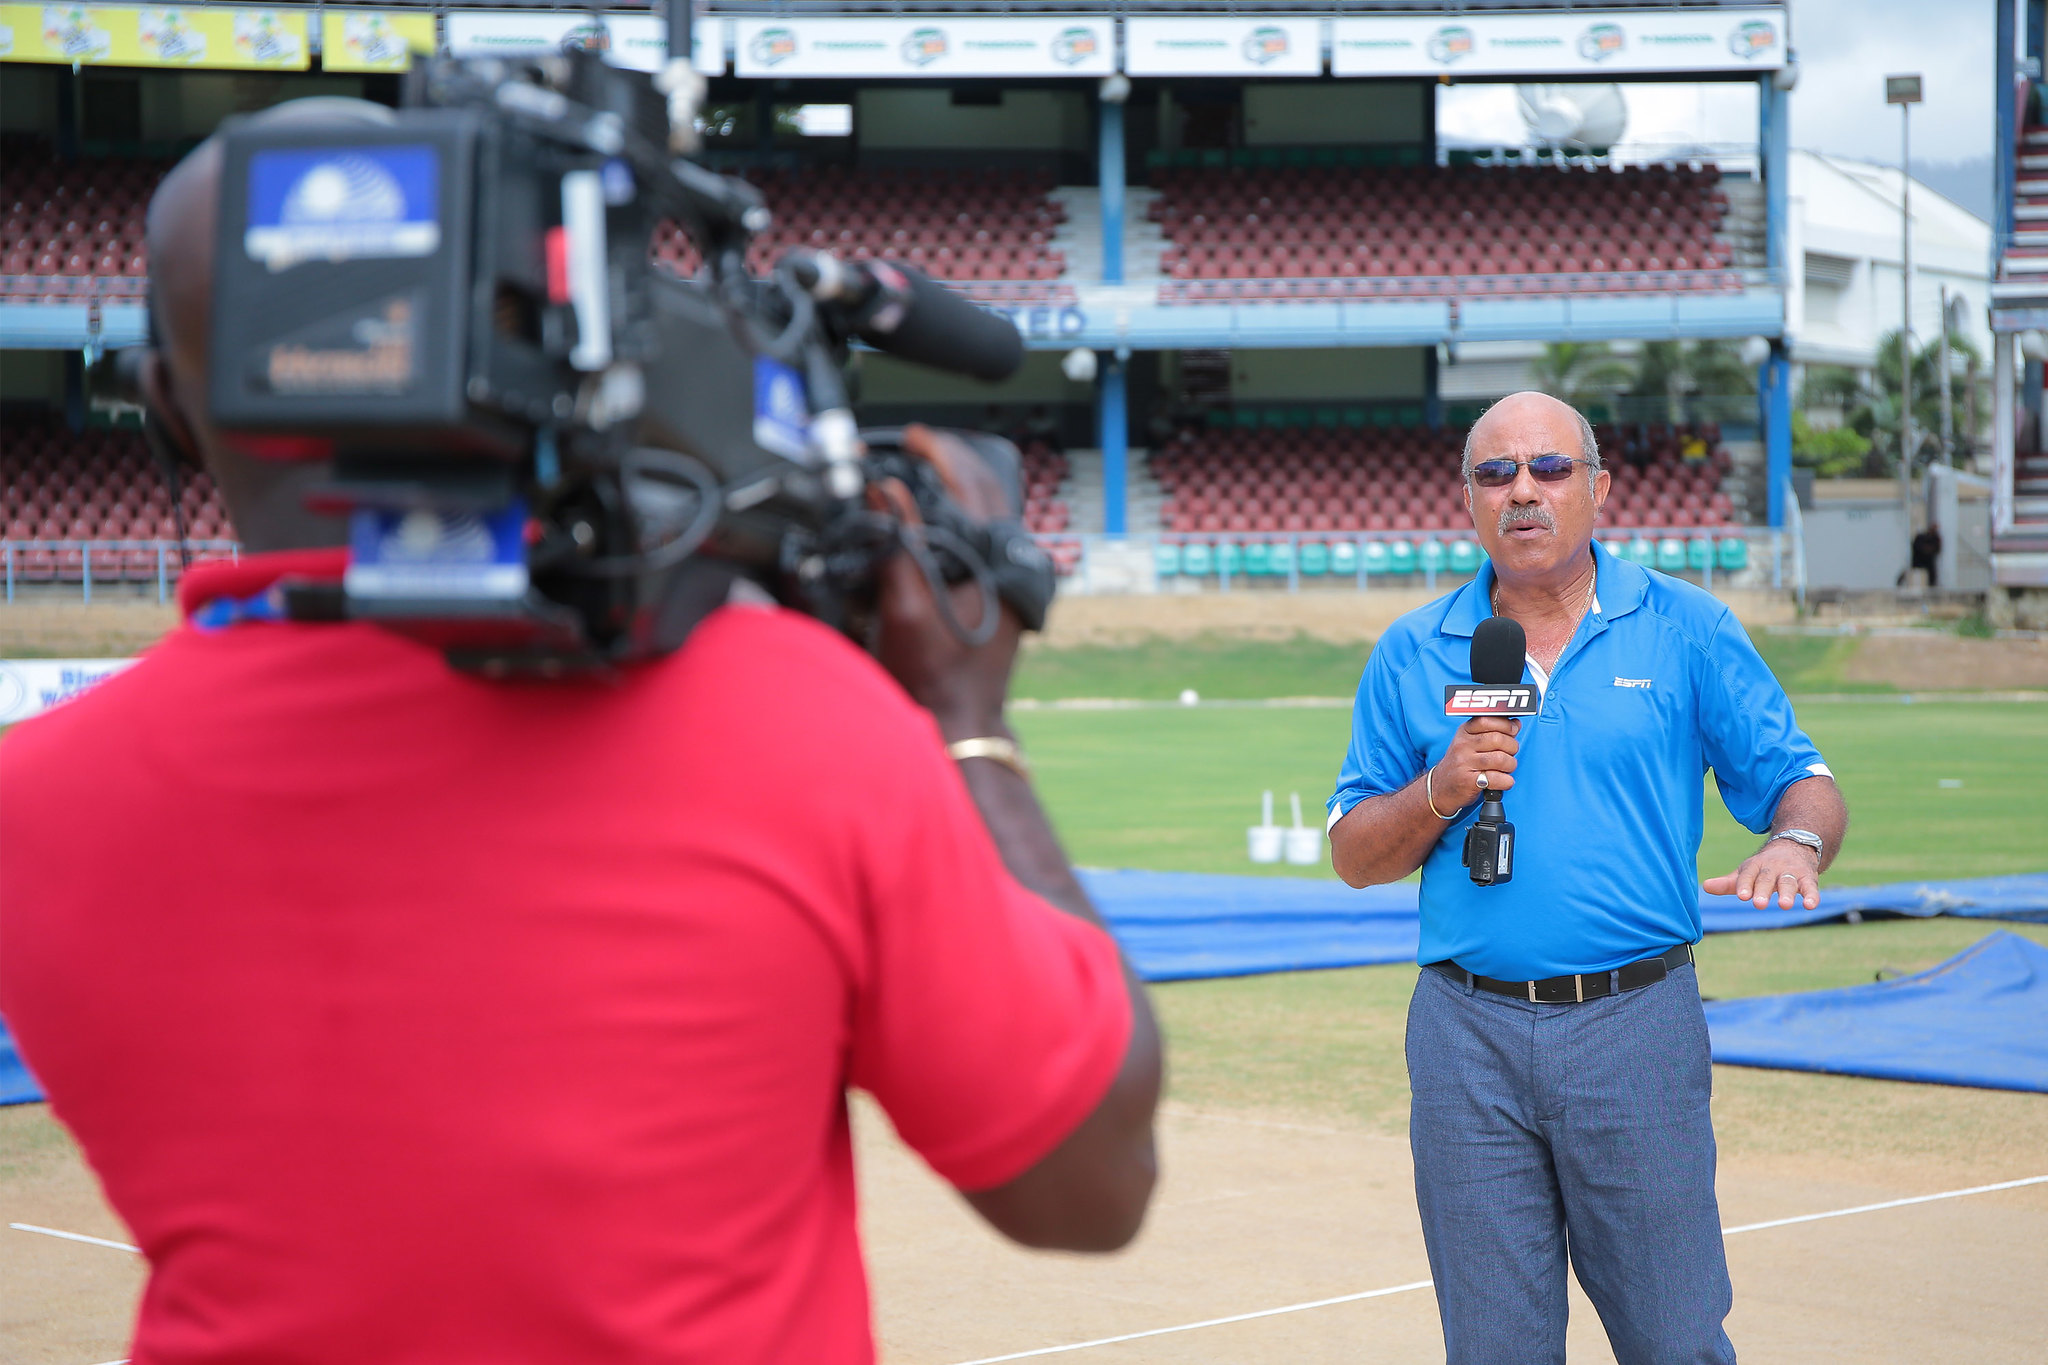 Team USA's Super50 Campaign to be Broadcast on Willow TV - USA Cricket